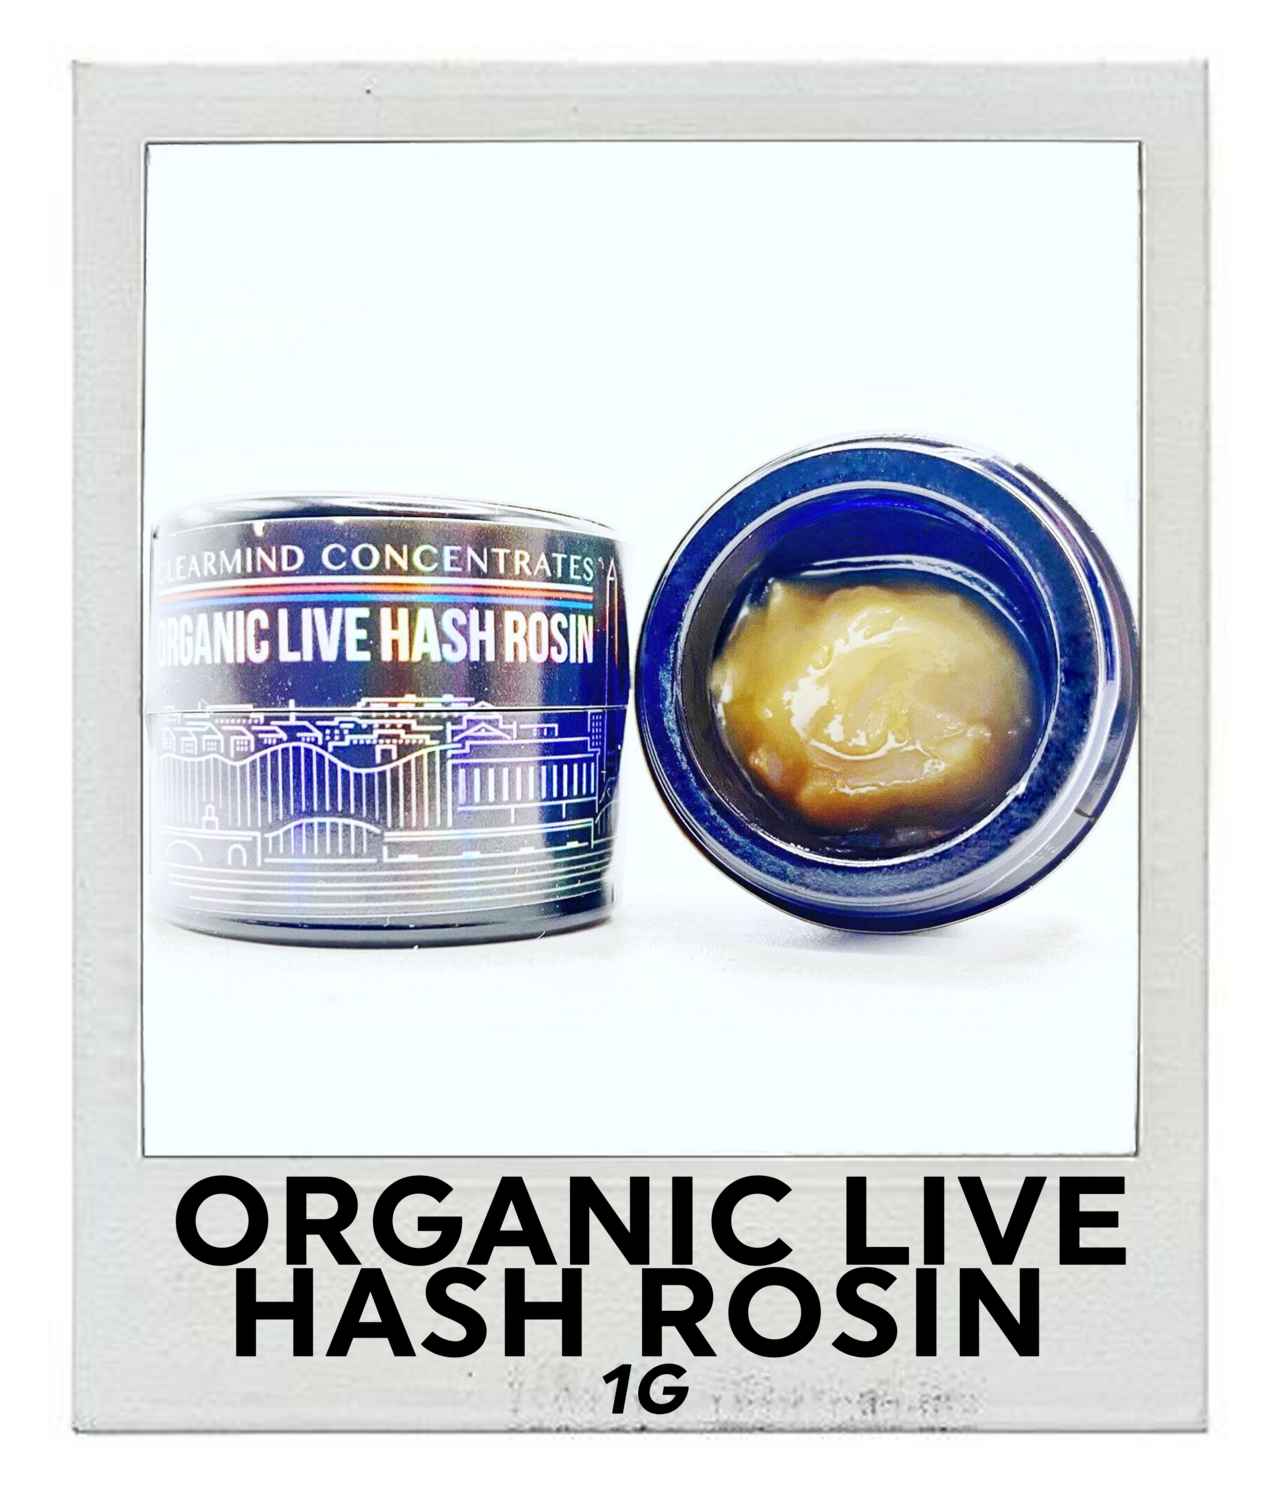 Clearmind Concentrates Organic Live Hash Rosin (1G)